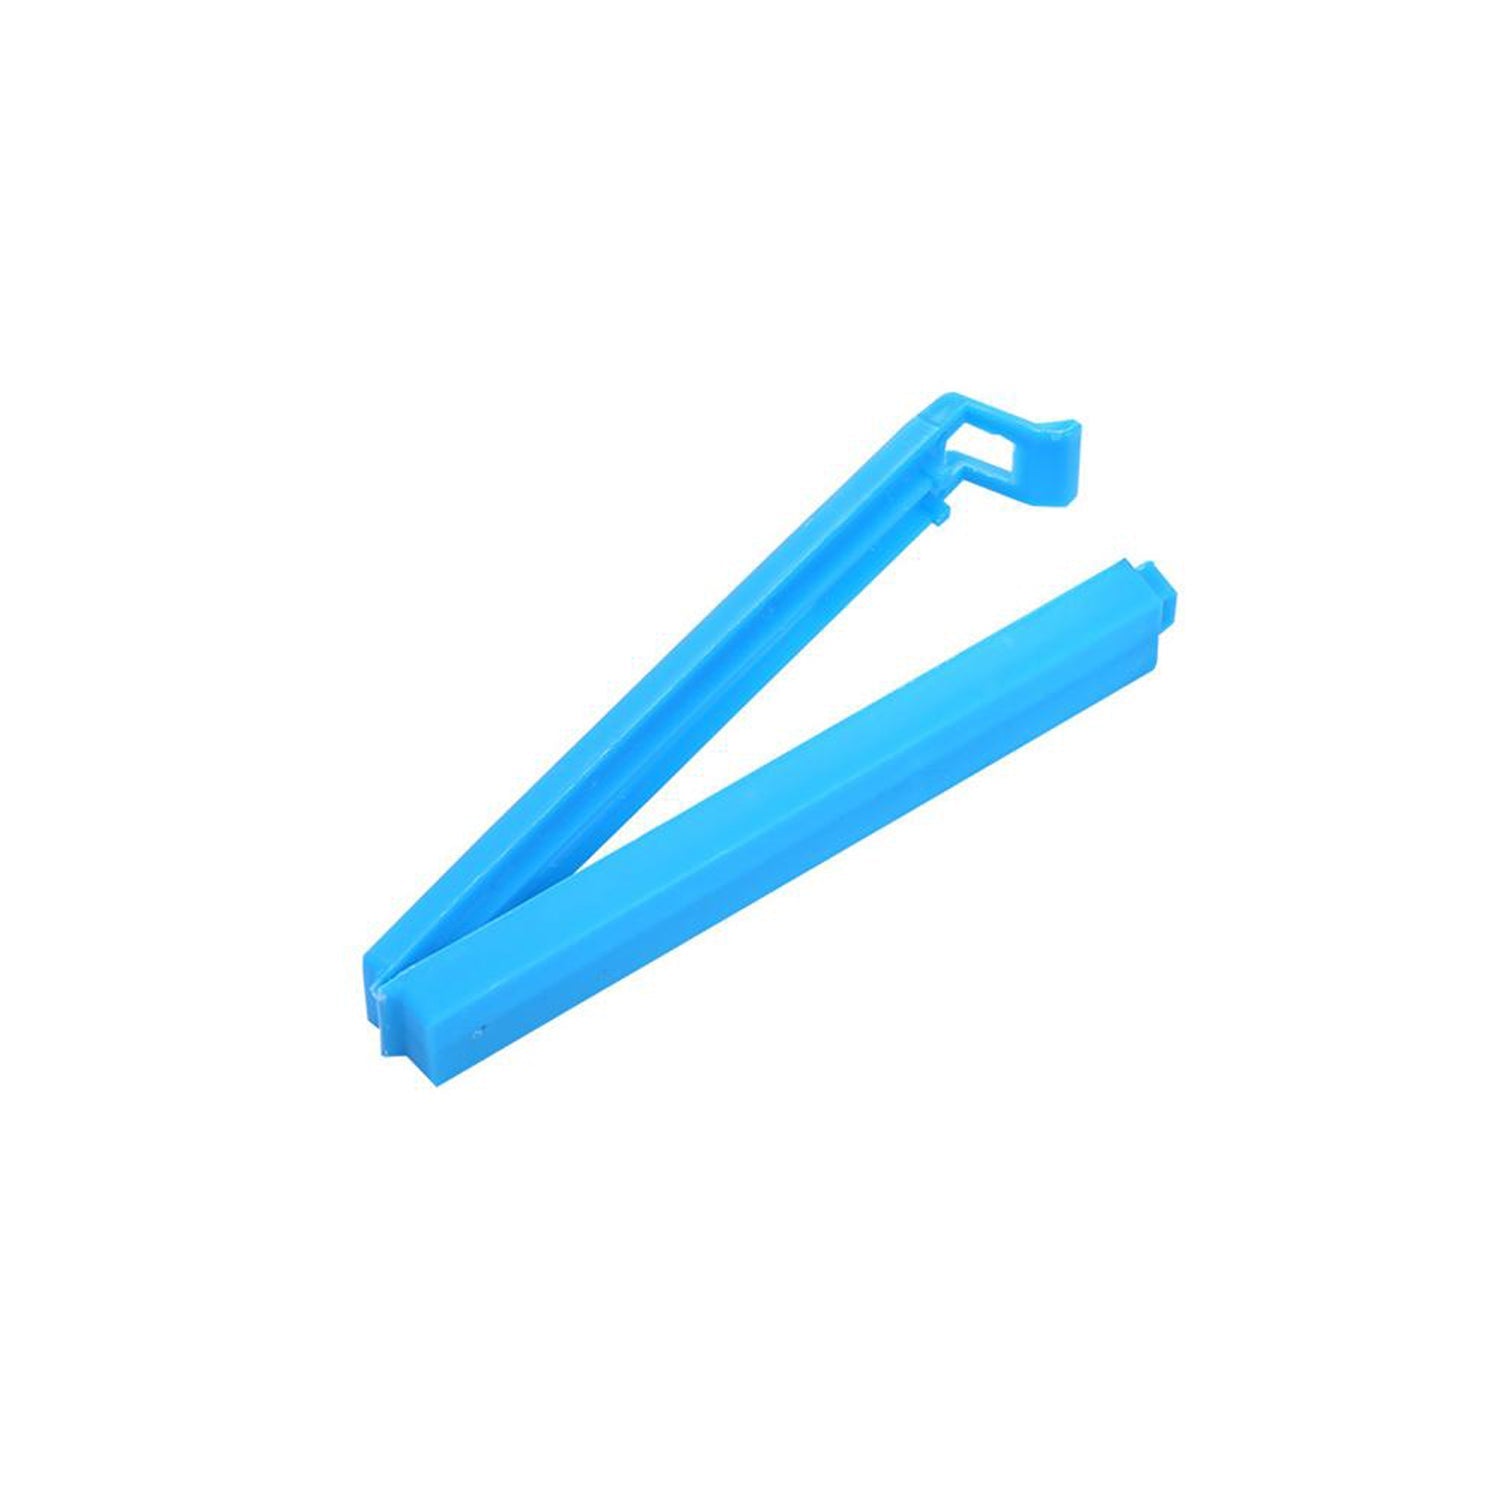 2707 100 Pc Food Sealing Clip used in all kinds of household and official kitchen places for sealing and covering packed food stuff and items.